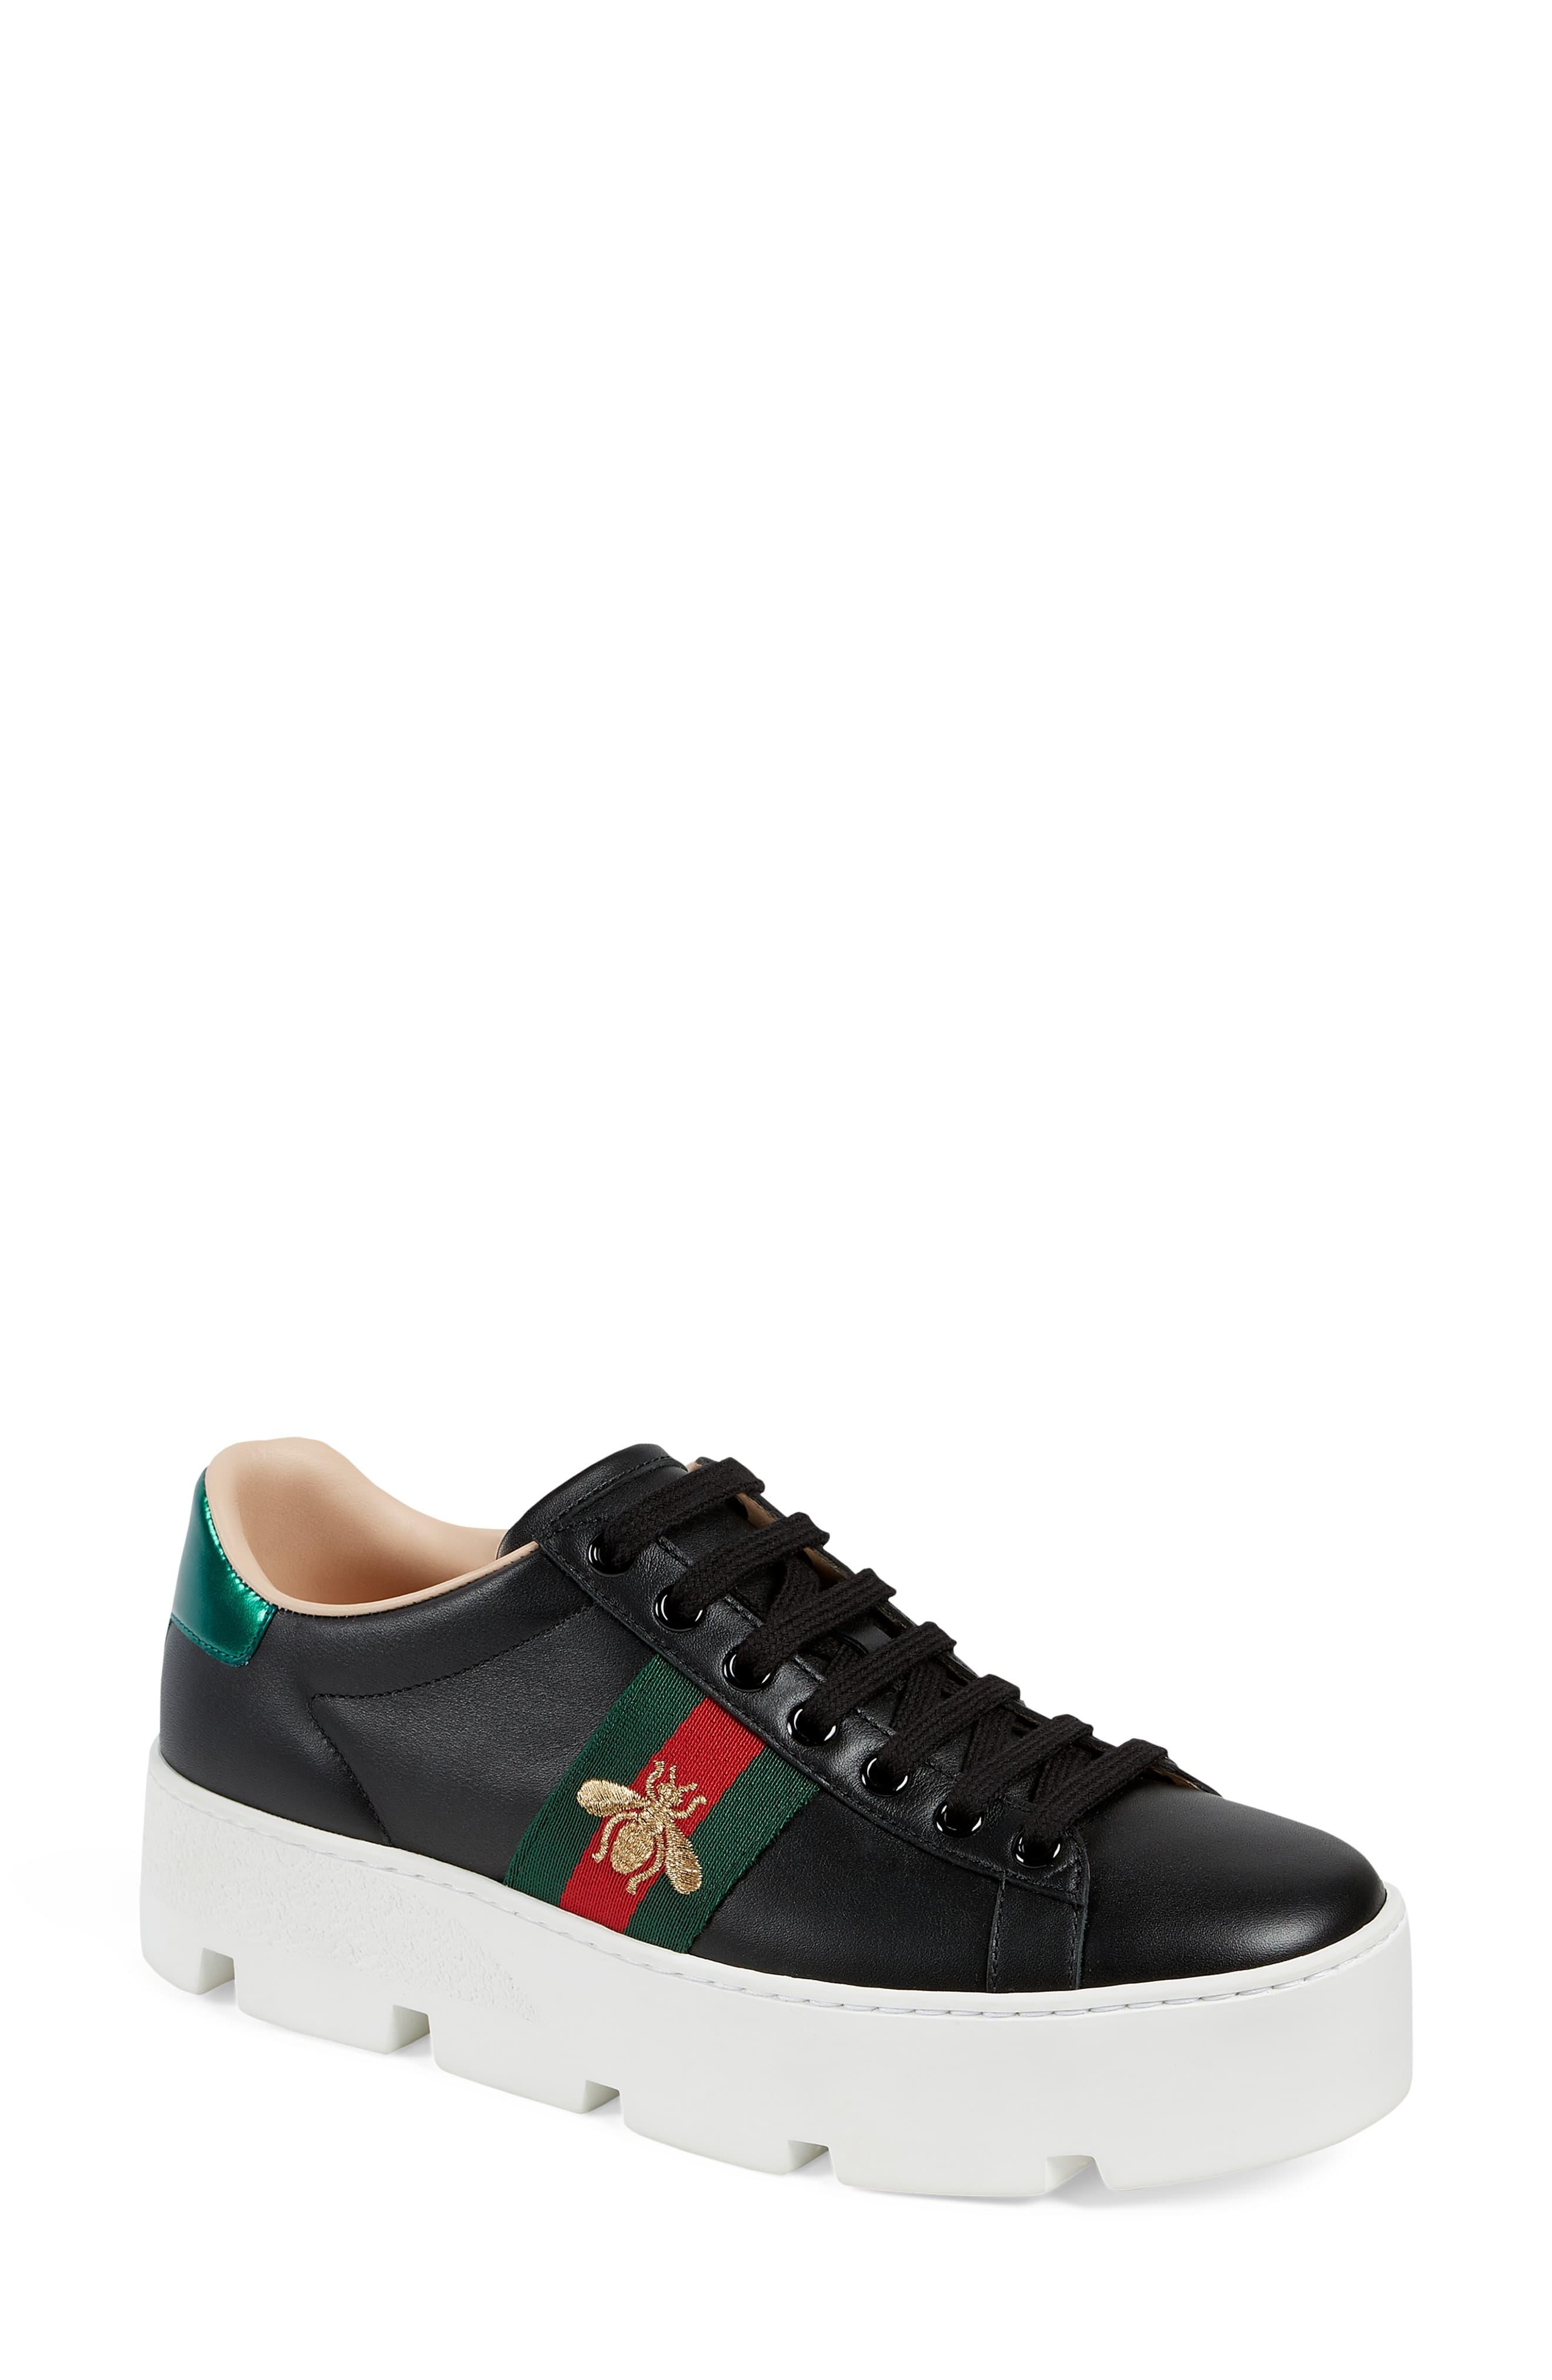 Gucci Ace Leather Platform Sneakers - Lyst